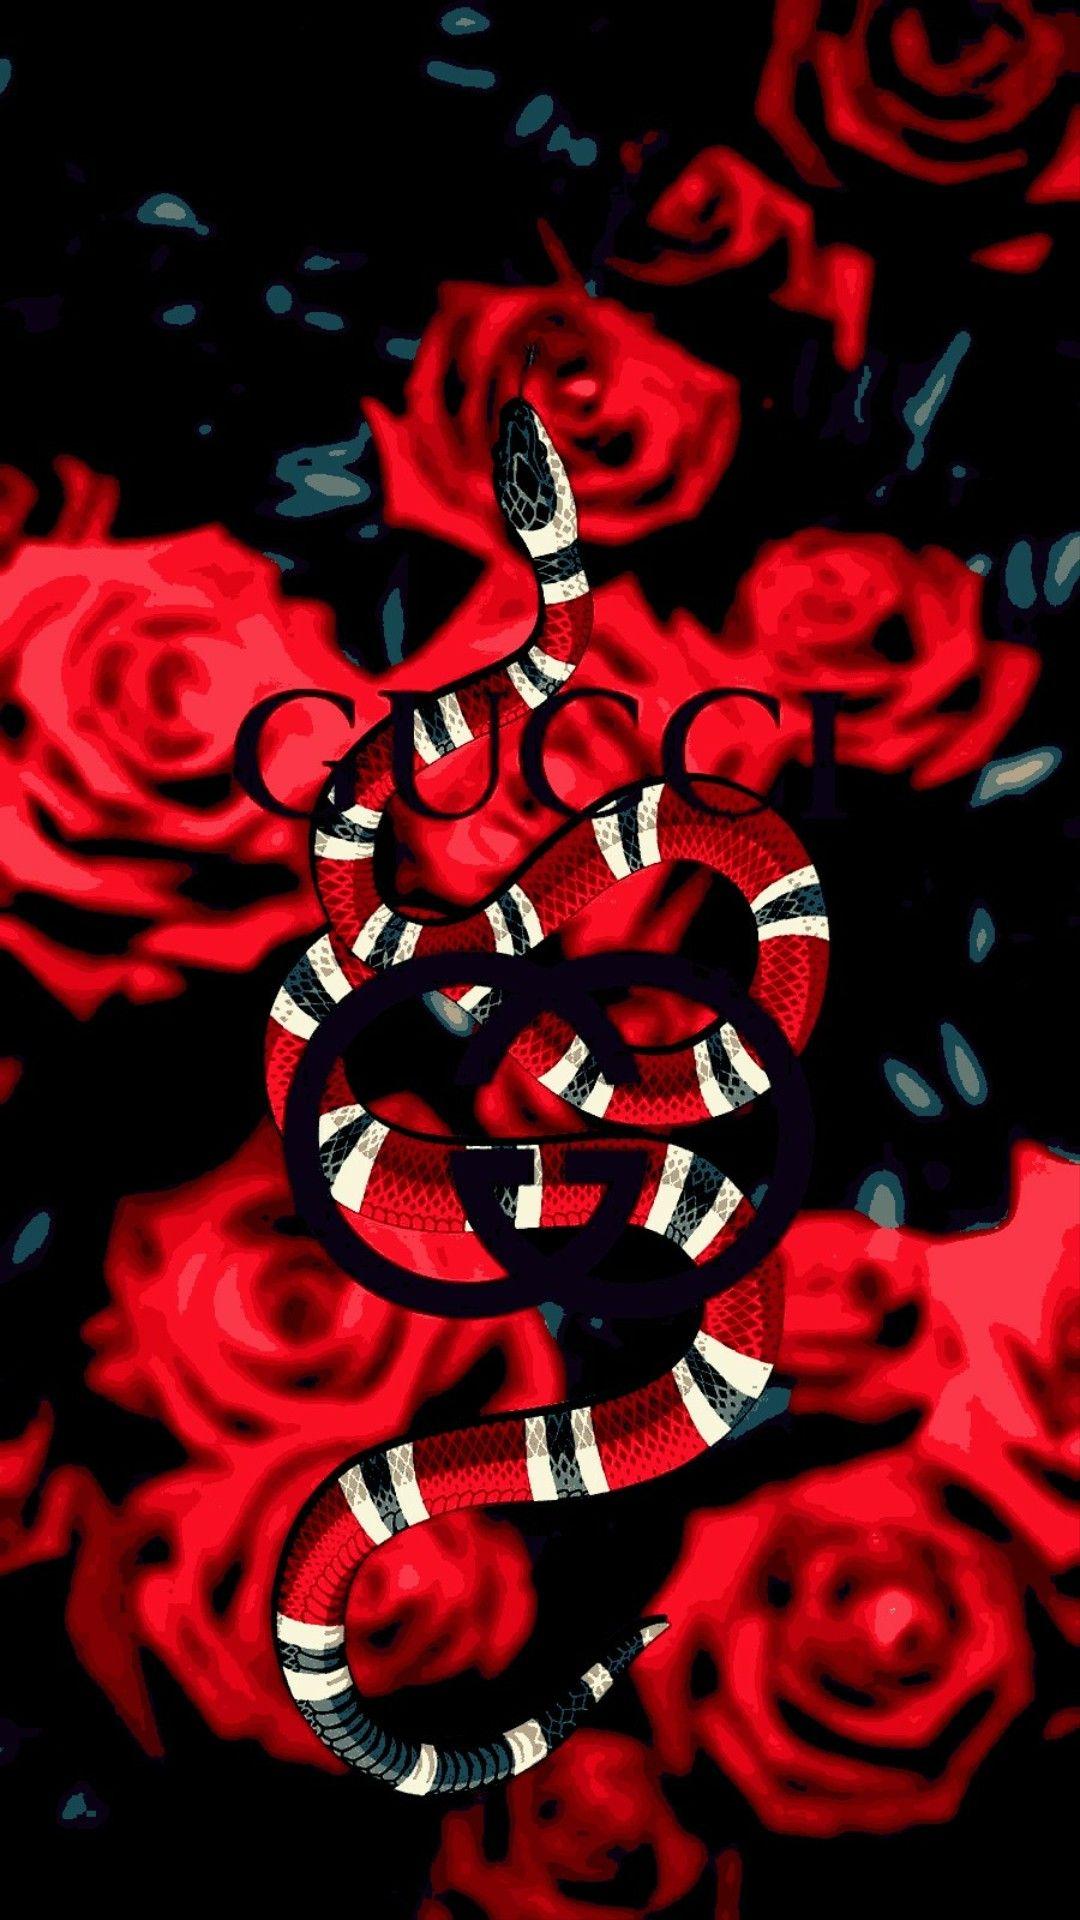 Roses of Gucci Snake. Gold wallpaper iphone, Supreme iphone wallpaper, Hypebeast iphone wallpaper